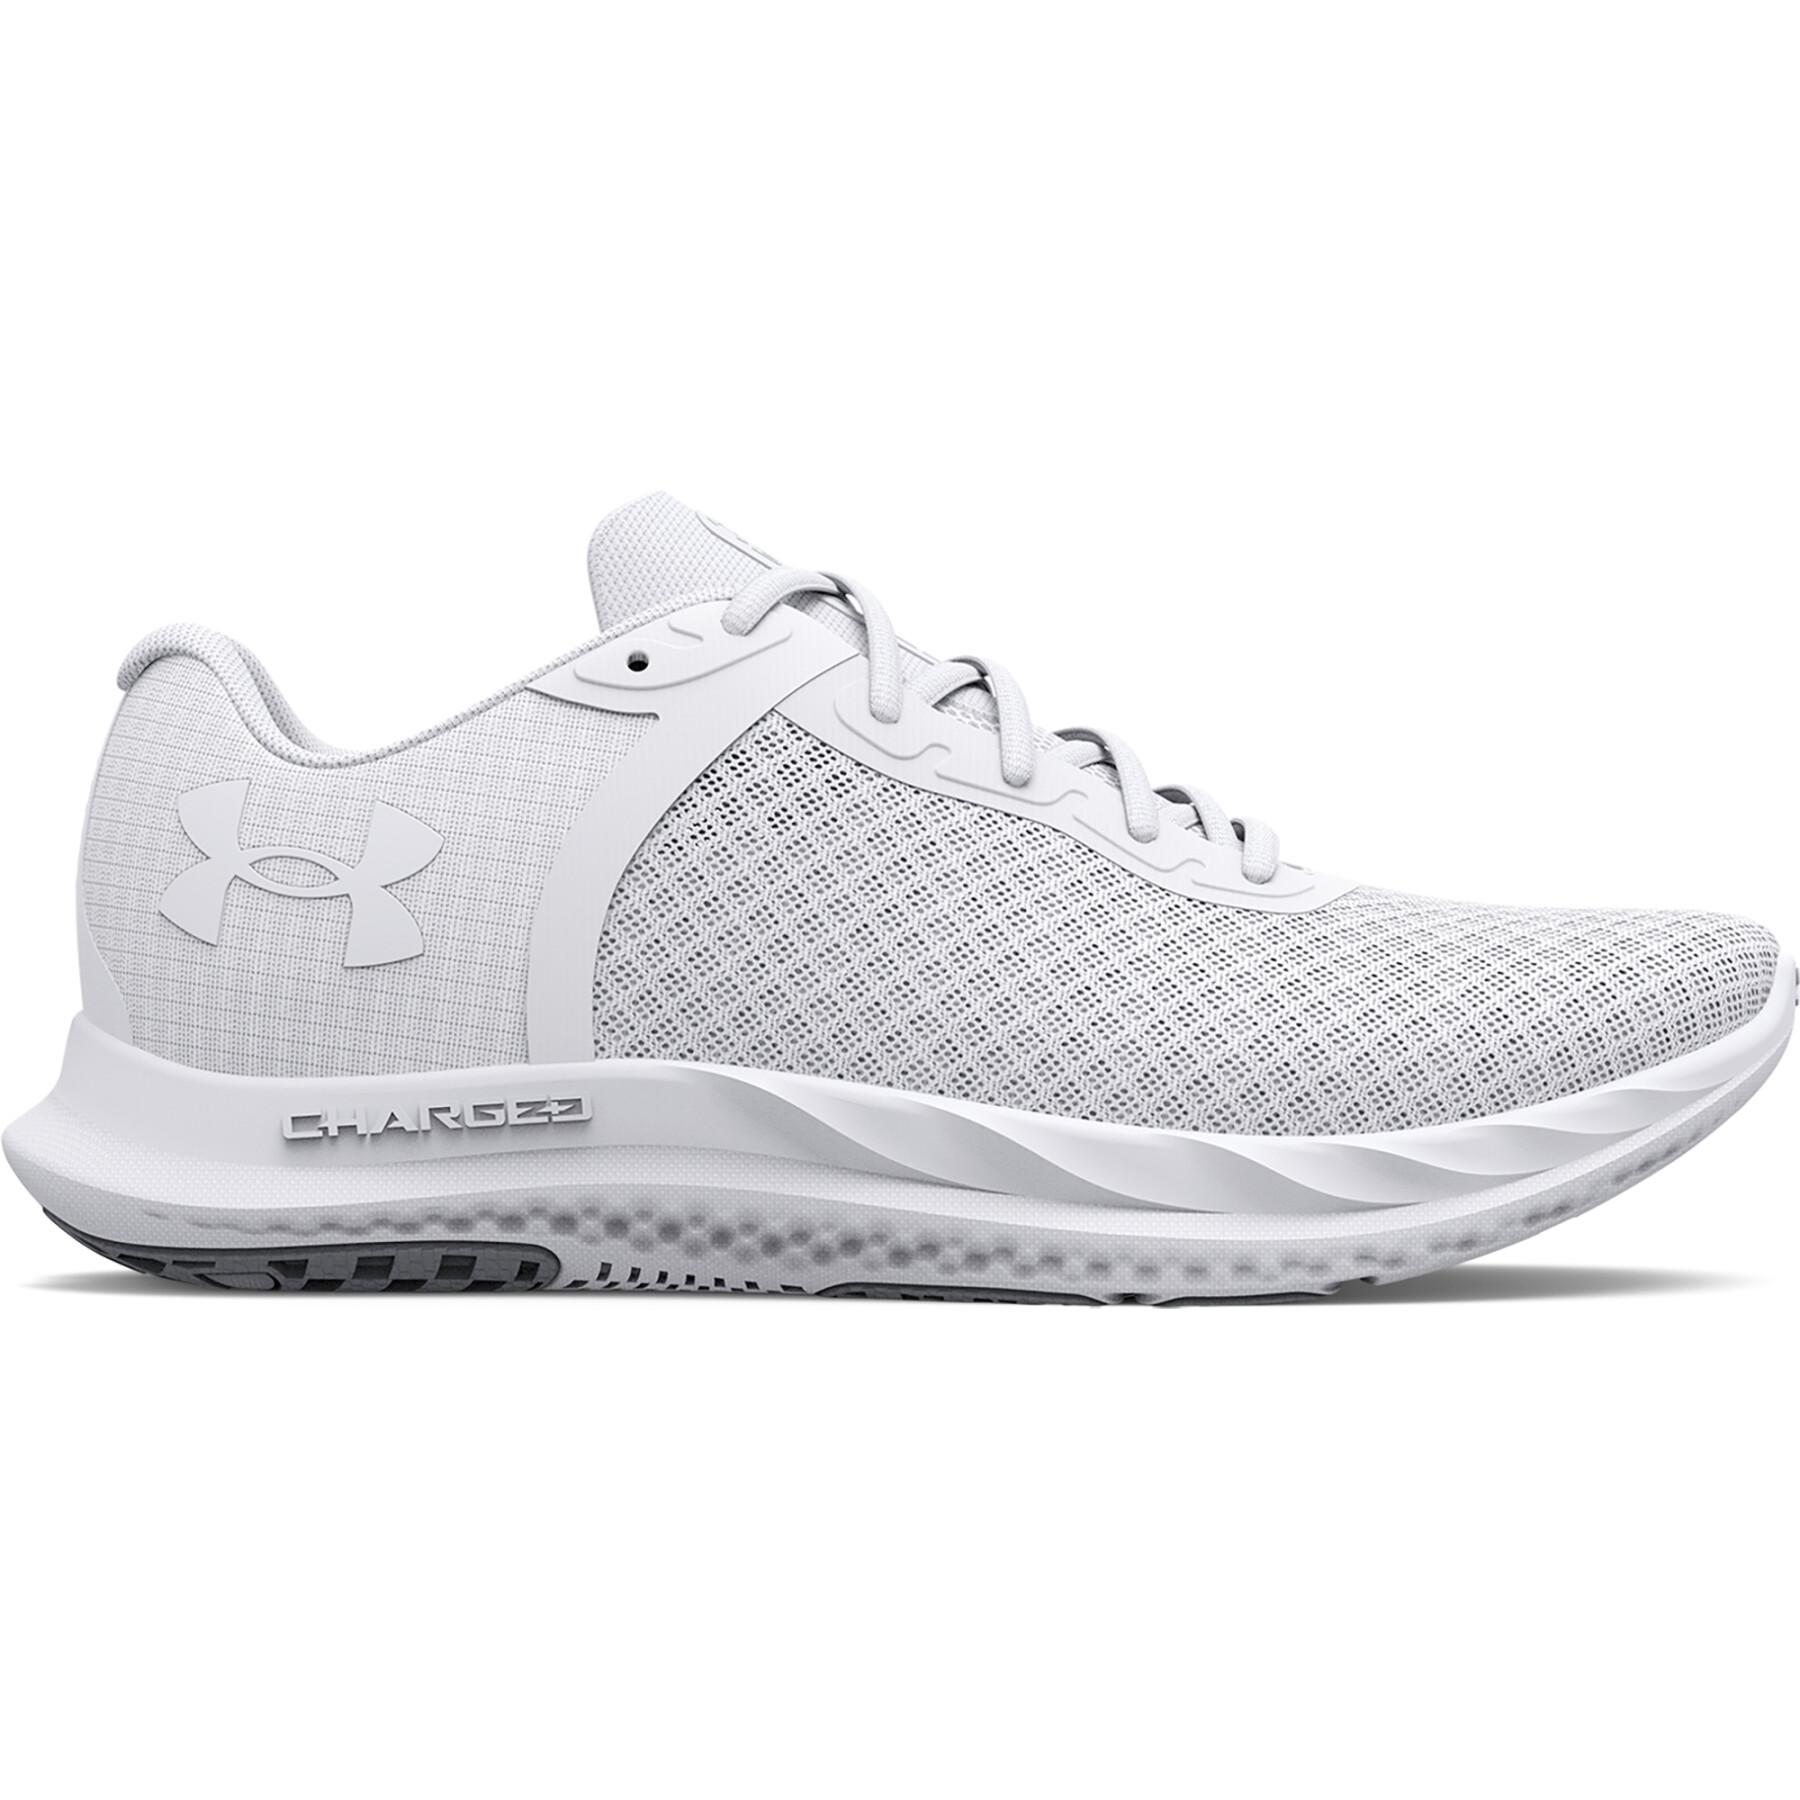 Running shoes Under Armour Charged breeze